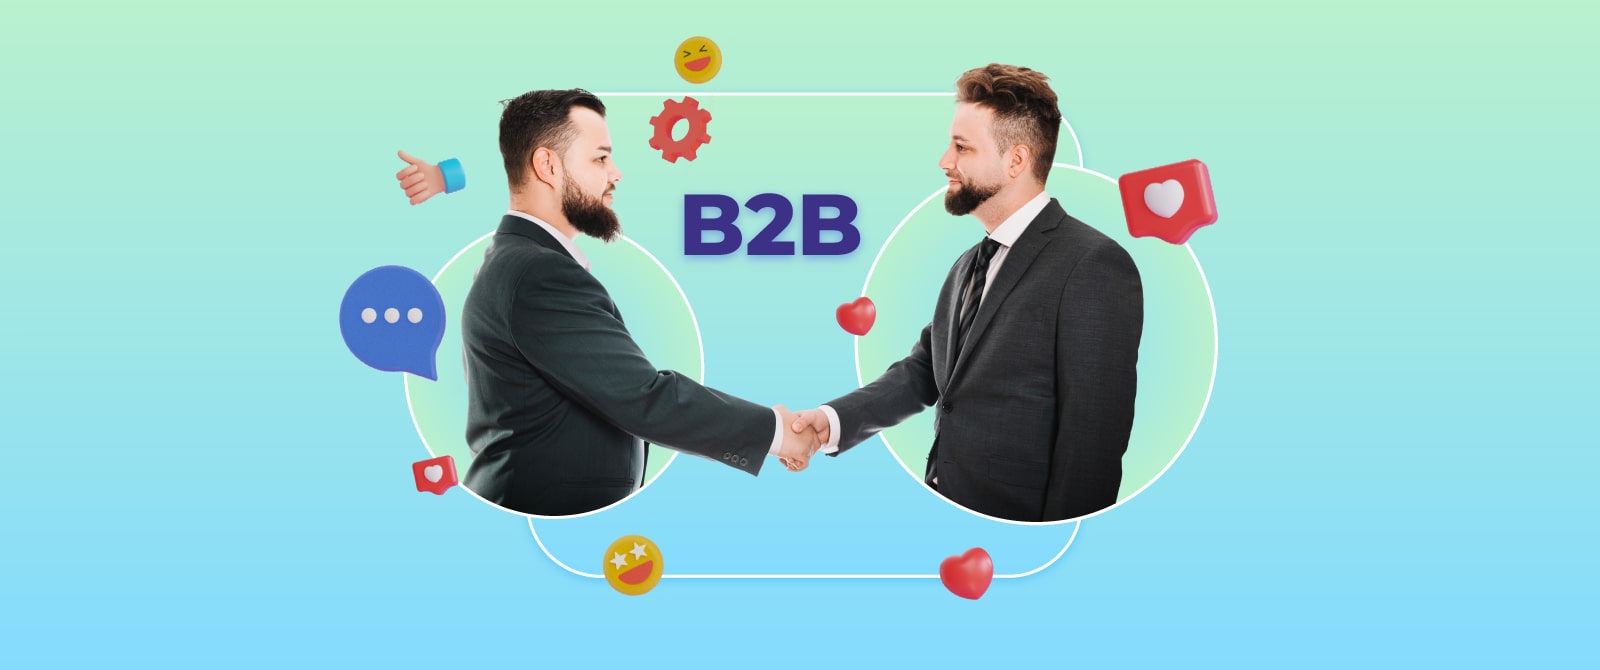 10+ Tips to Run B2B Networking Sessions At Your Next Virtual Event